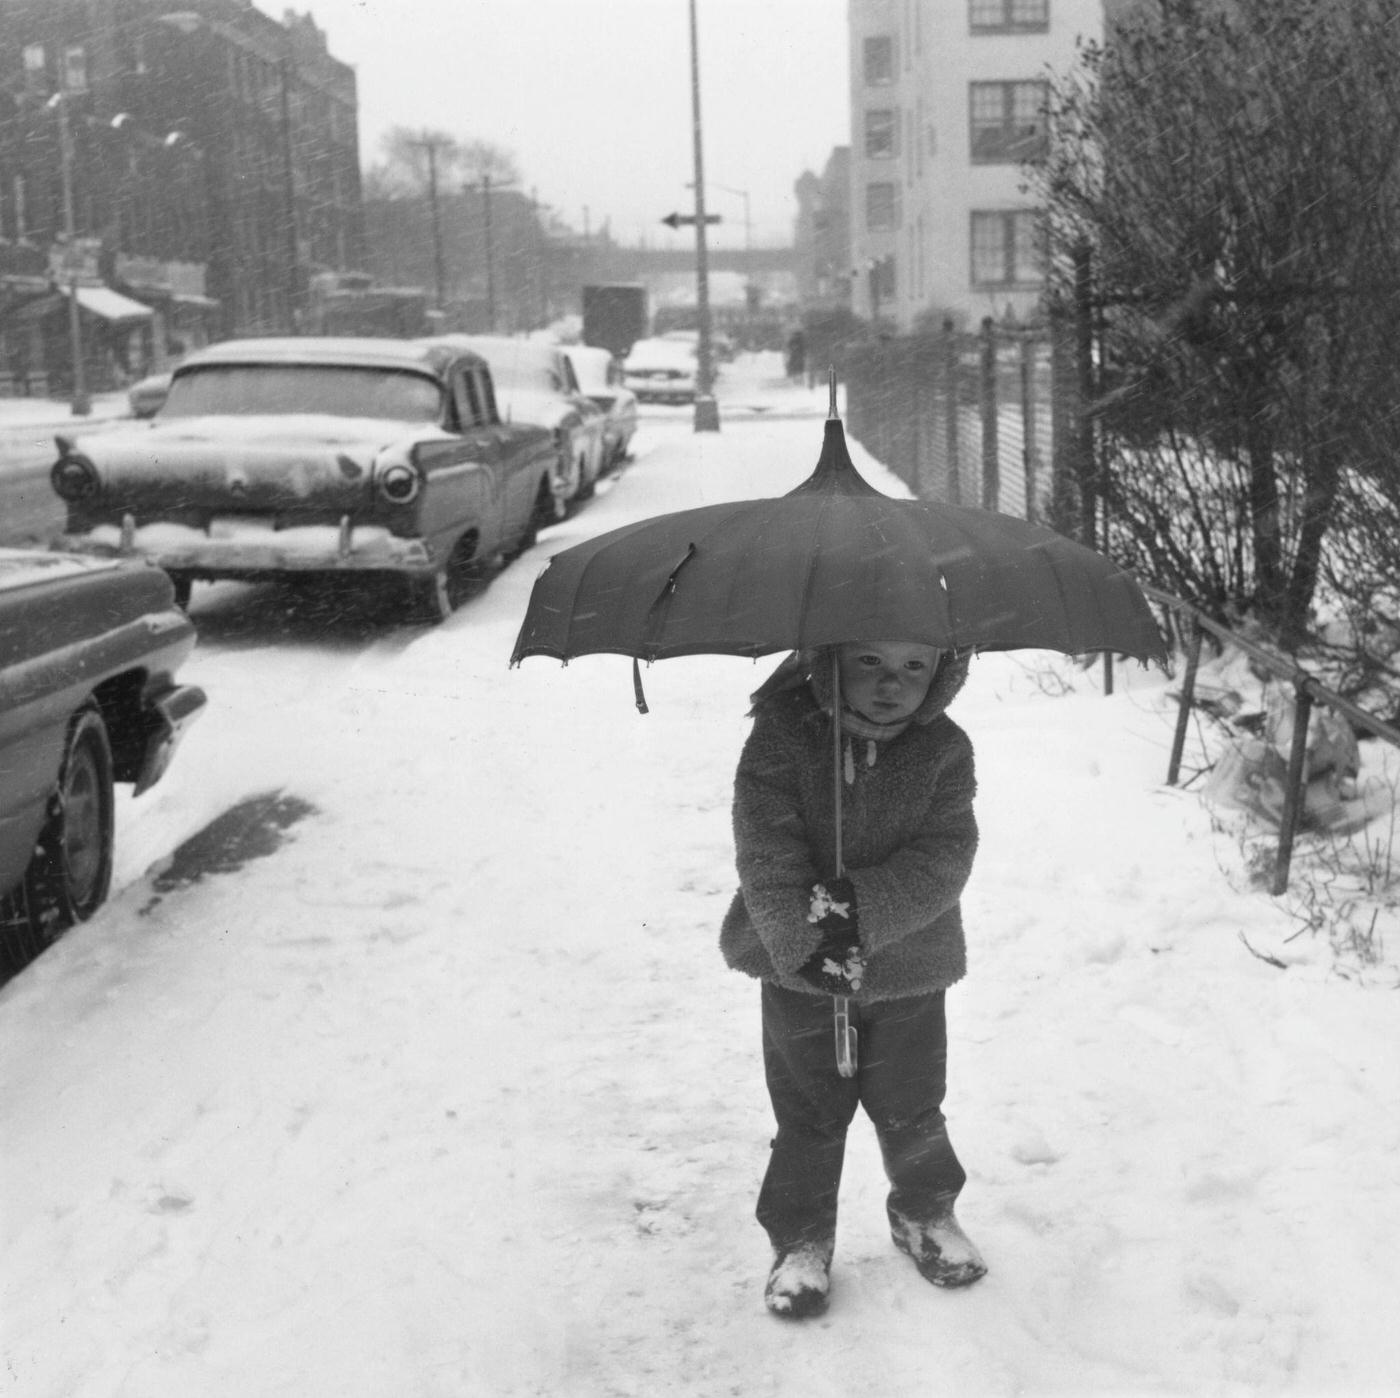 Two-year-old Mary Olskey carries an umbrella as she takes tentative steps on the snow in the Astoria neighbourhood of the Queens borough of New York City, New York, 11th February 1964